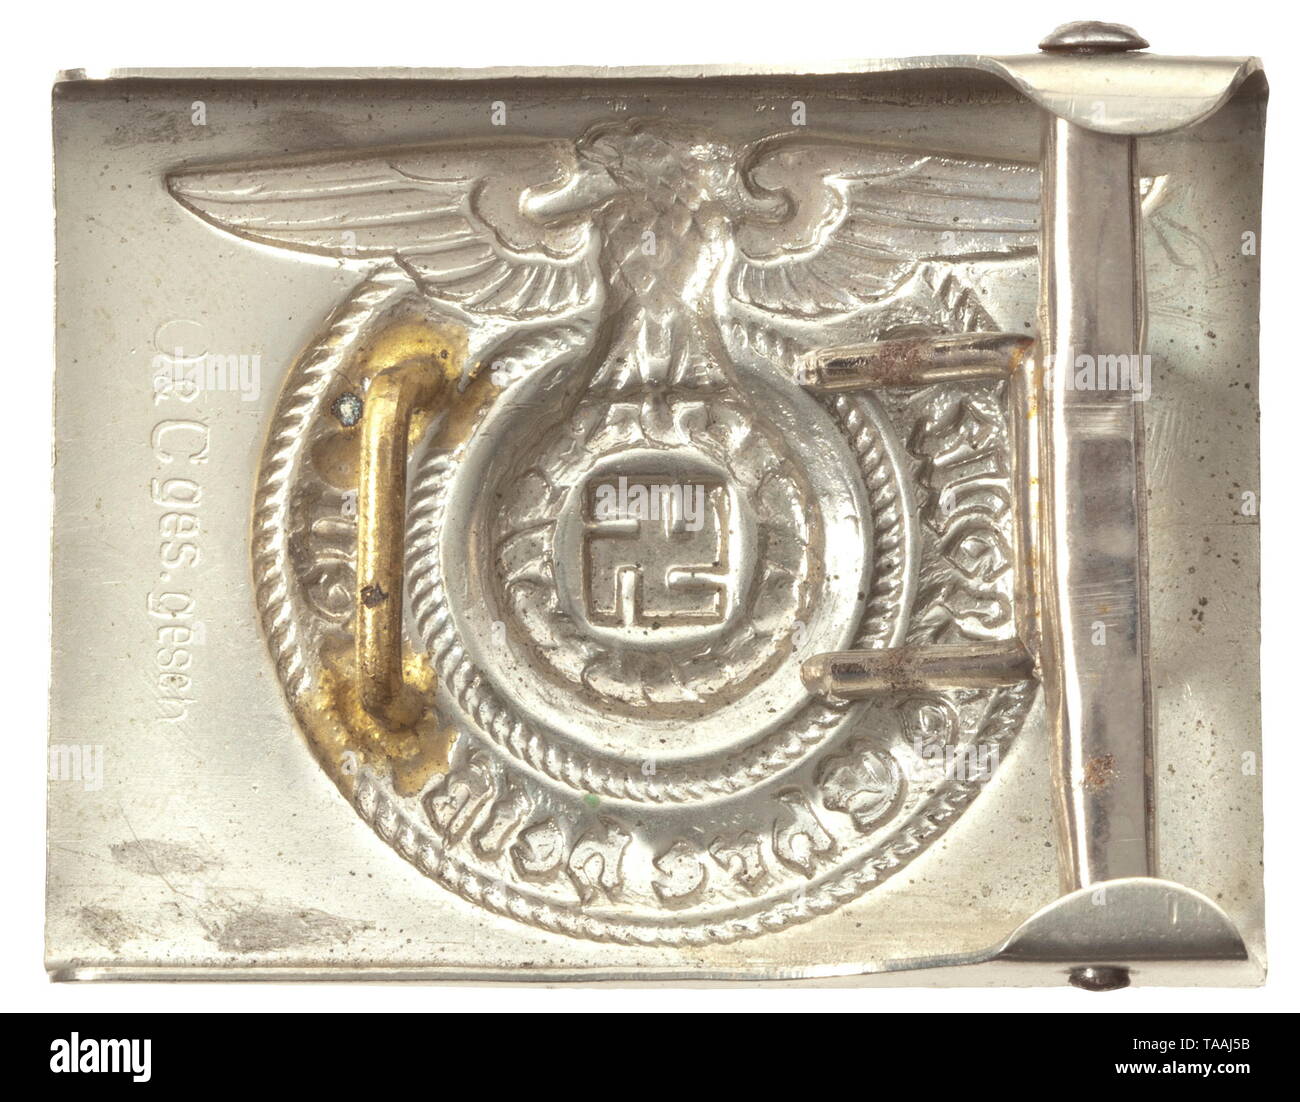 A belt for enlisted men/NCOs of the Allgemeine SS Early nickel belt buckle of maker Overhoff & Cie, on reverse side stamped 'O&C ges.gesch', with the belt made of black patent leather, with inside stamp 'SS L2/682/38 RZM' with two belt loops. Good condition. historic, historical, 20th century, 1930s, 1940s, Waffen-SS, armed division of the SS, armed service, armed services, NS, National Socialism, Nazism, Third Reich, German Reich, Germany, military, militaria, utensil, piece of equipment, utensils, object, objects, stills, clipping, clippings, cut out, cut-out, cut-outs, f, Editorial-Use-Only Stock Photo